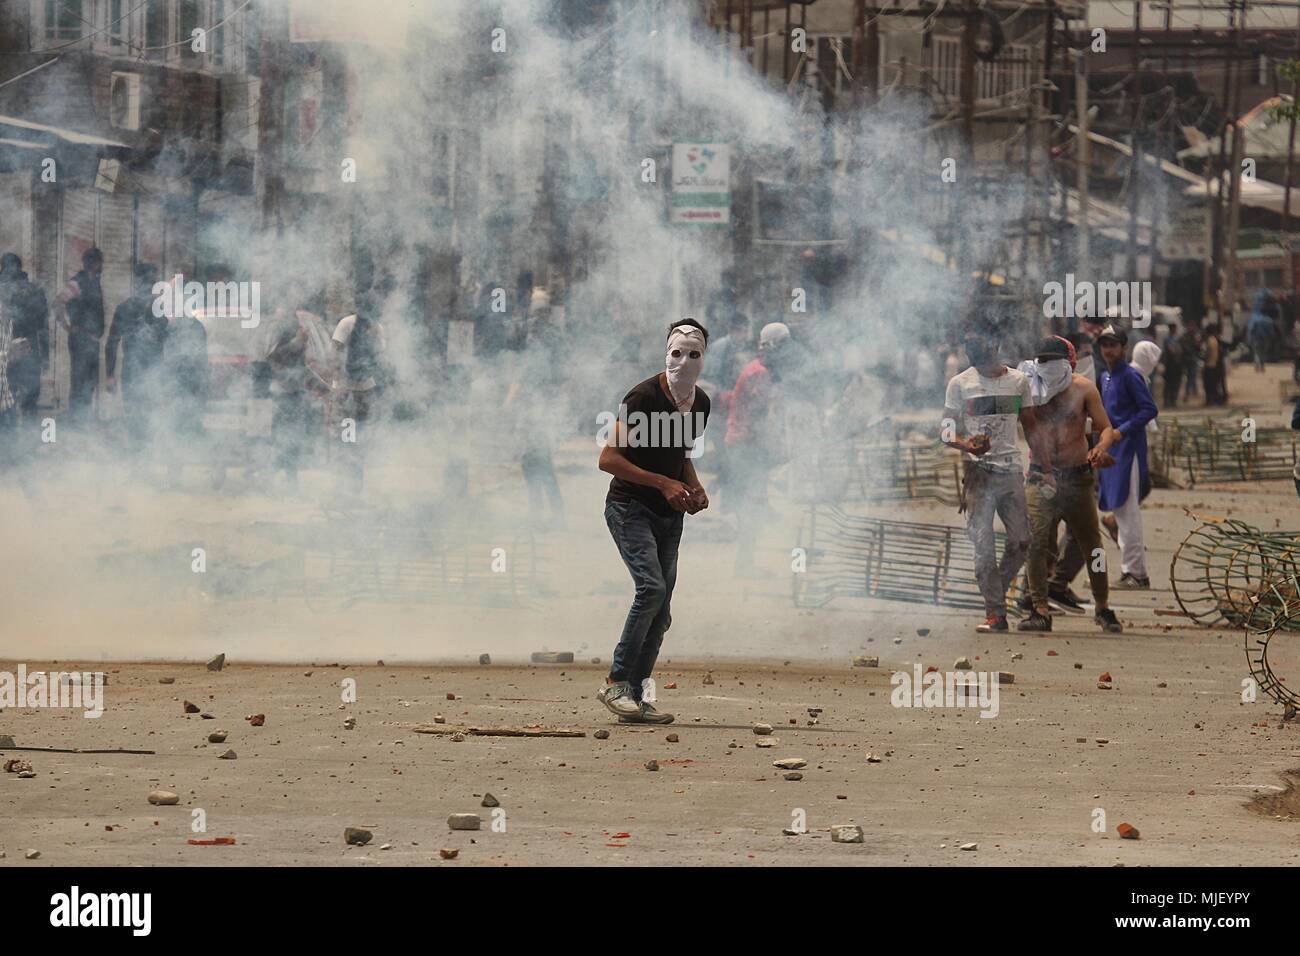 May 5, 2018 - Srinagar, Jammu and Kashmir, India - A protester throw stones during anti-India clashes in Srinagar the summer of Indian controlled Kashmir on May 05, 2018. Four people including a protester and three rebels were killed during a gun-battle between rebels and Indian forces in Chattabal area of Srinagar. Massive clashes erupt across Srinagar after the news about the trapping of rebels and killing of protester spread across the city. Police fired teargas canisters, pellets, stun grenades and rubber coated bullets to disperse the angry crowd. (Credit Image: © Faisal Khan via ZUMA Wir Stock Photo